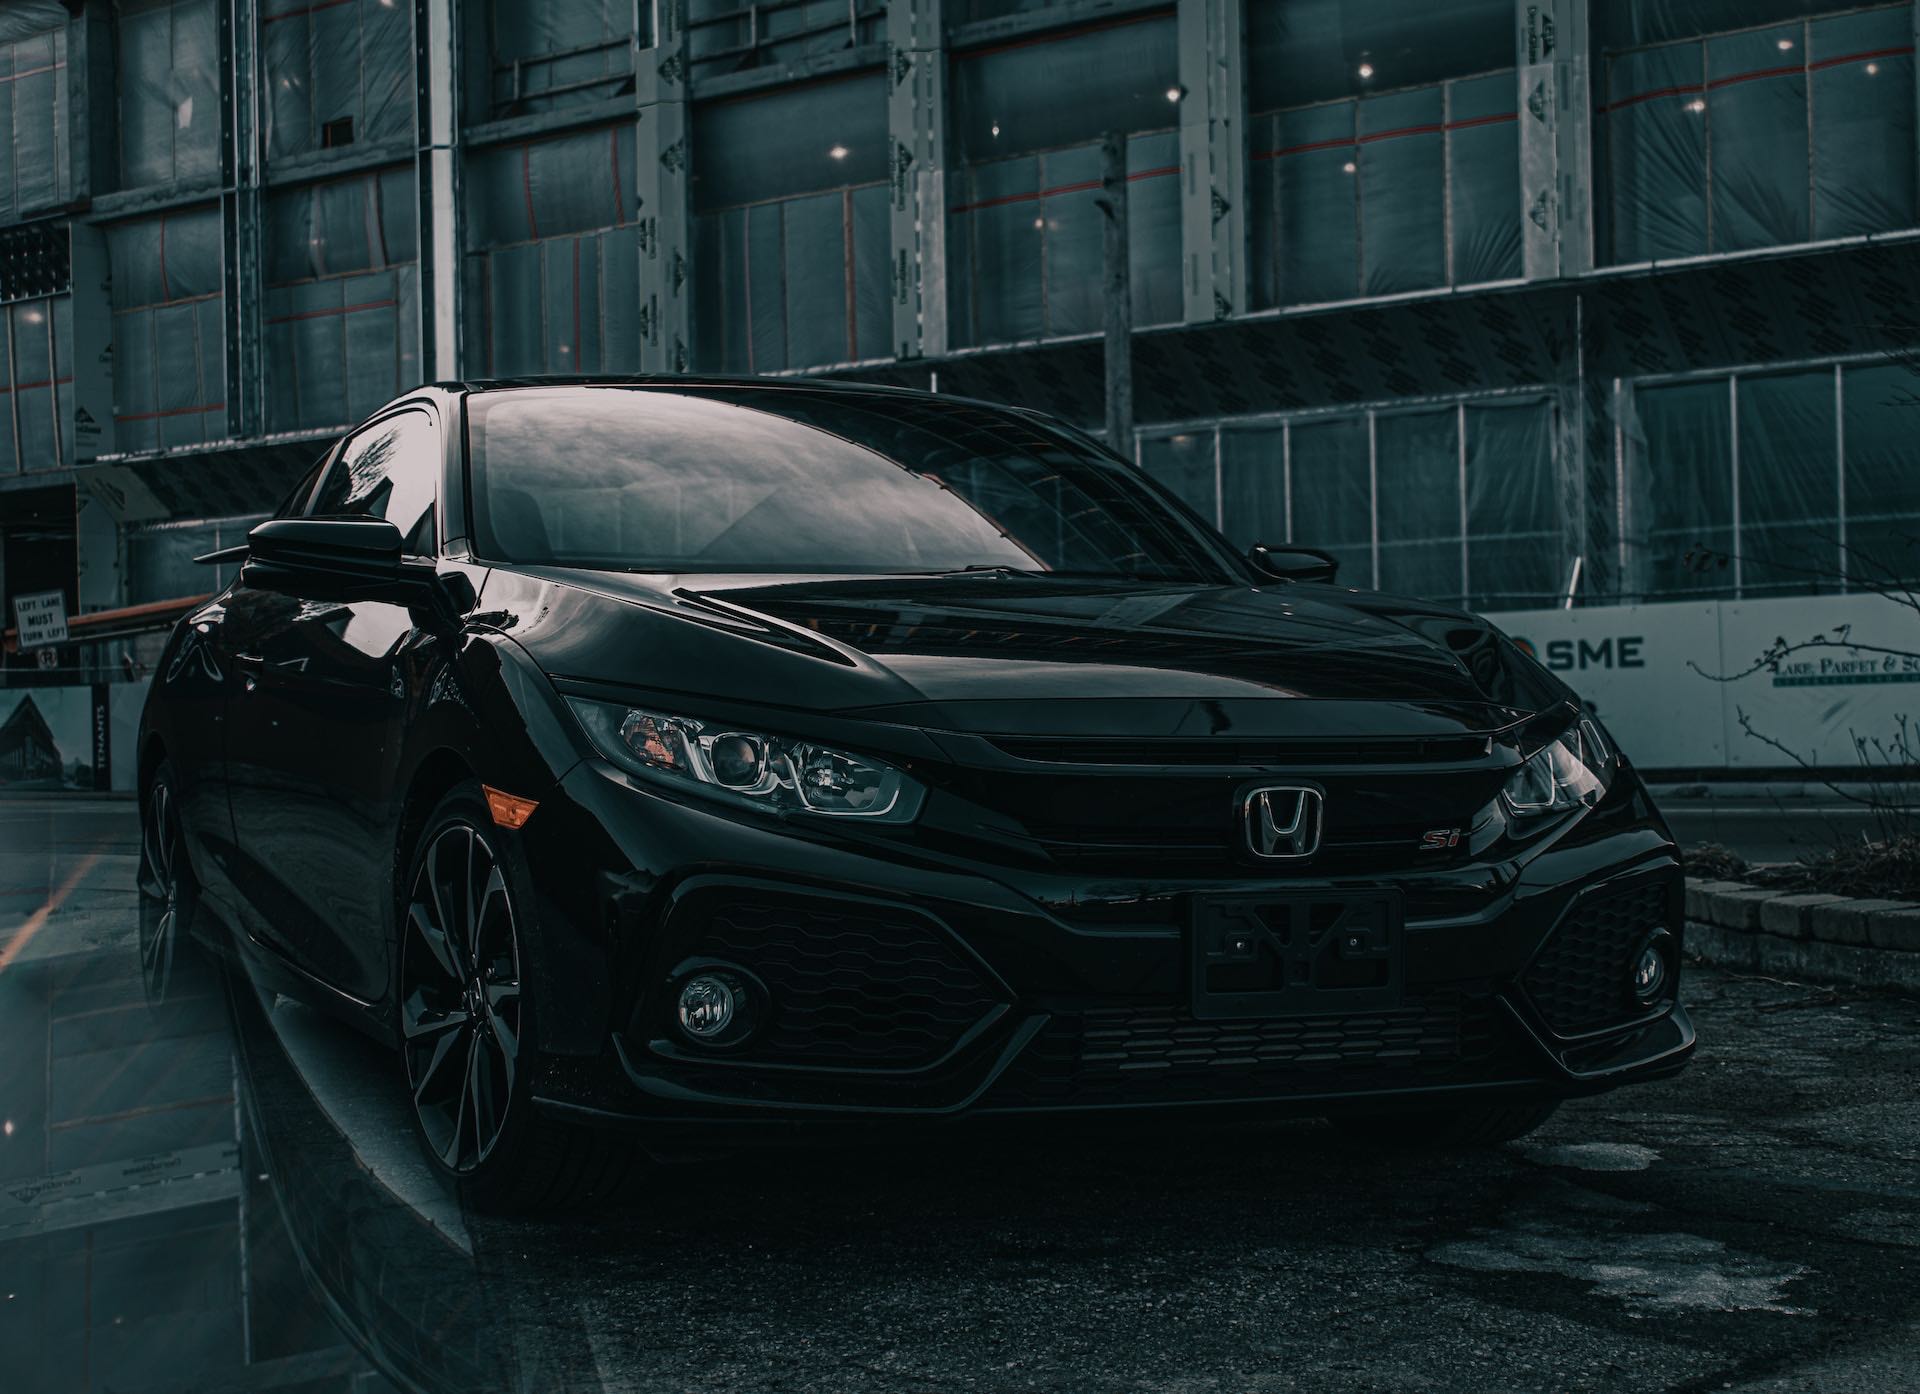 4. Honda Civic: The Quintessential Ride for America's Youth